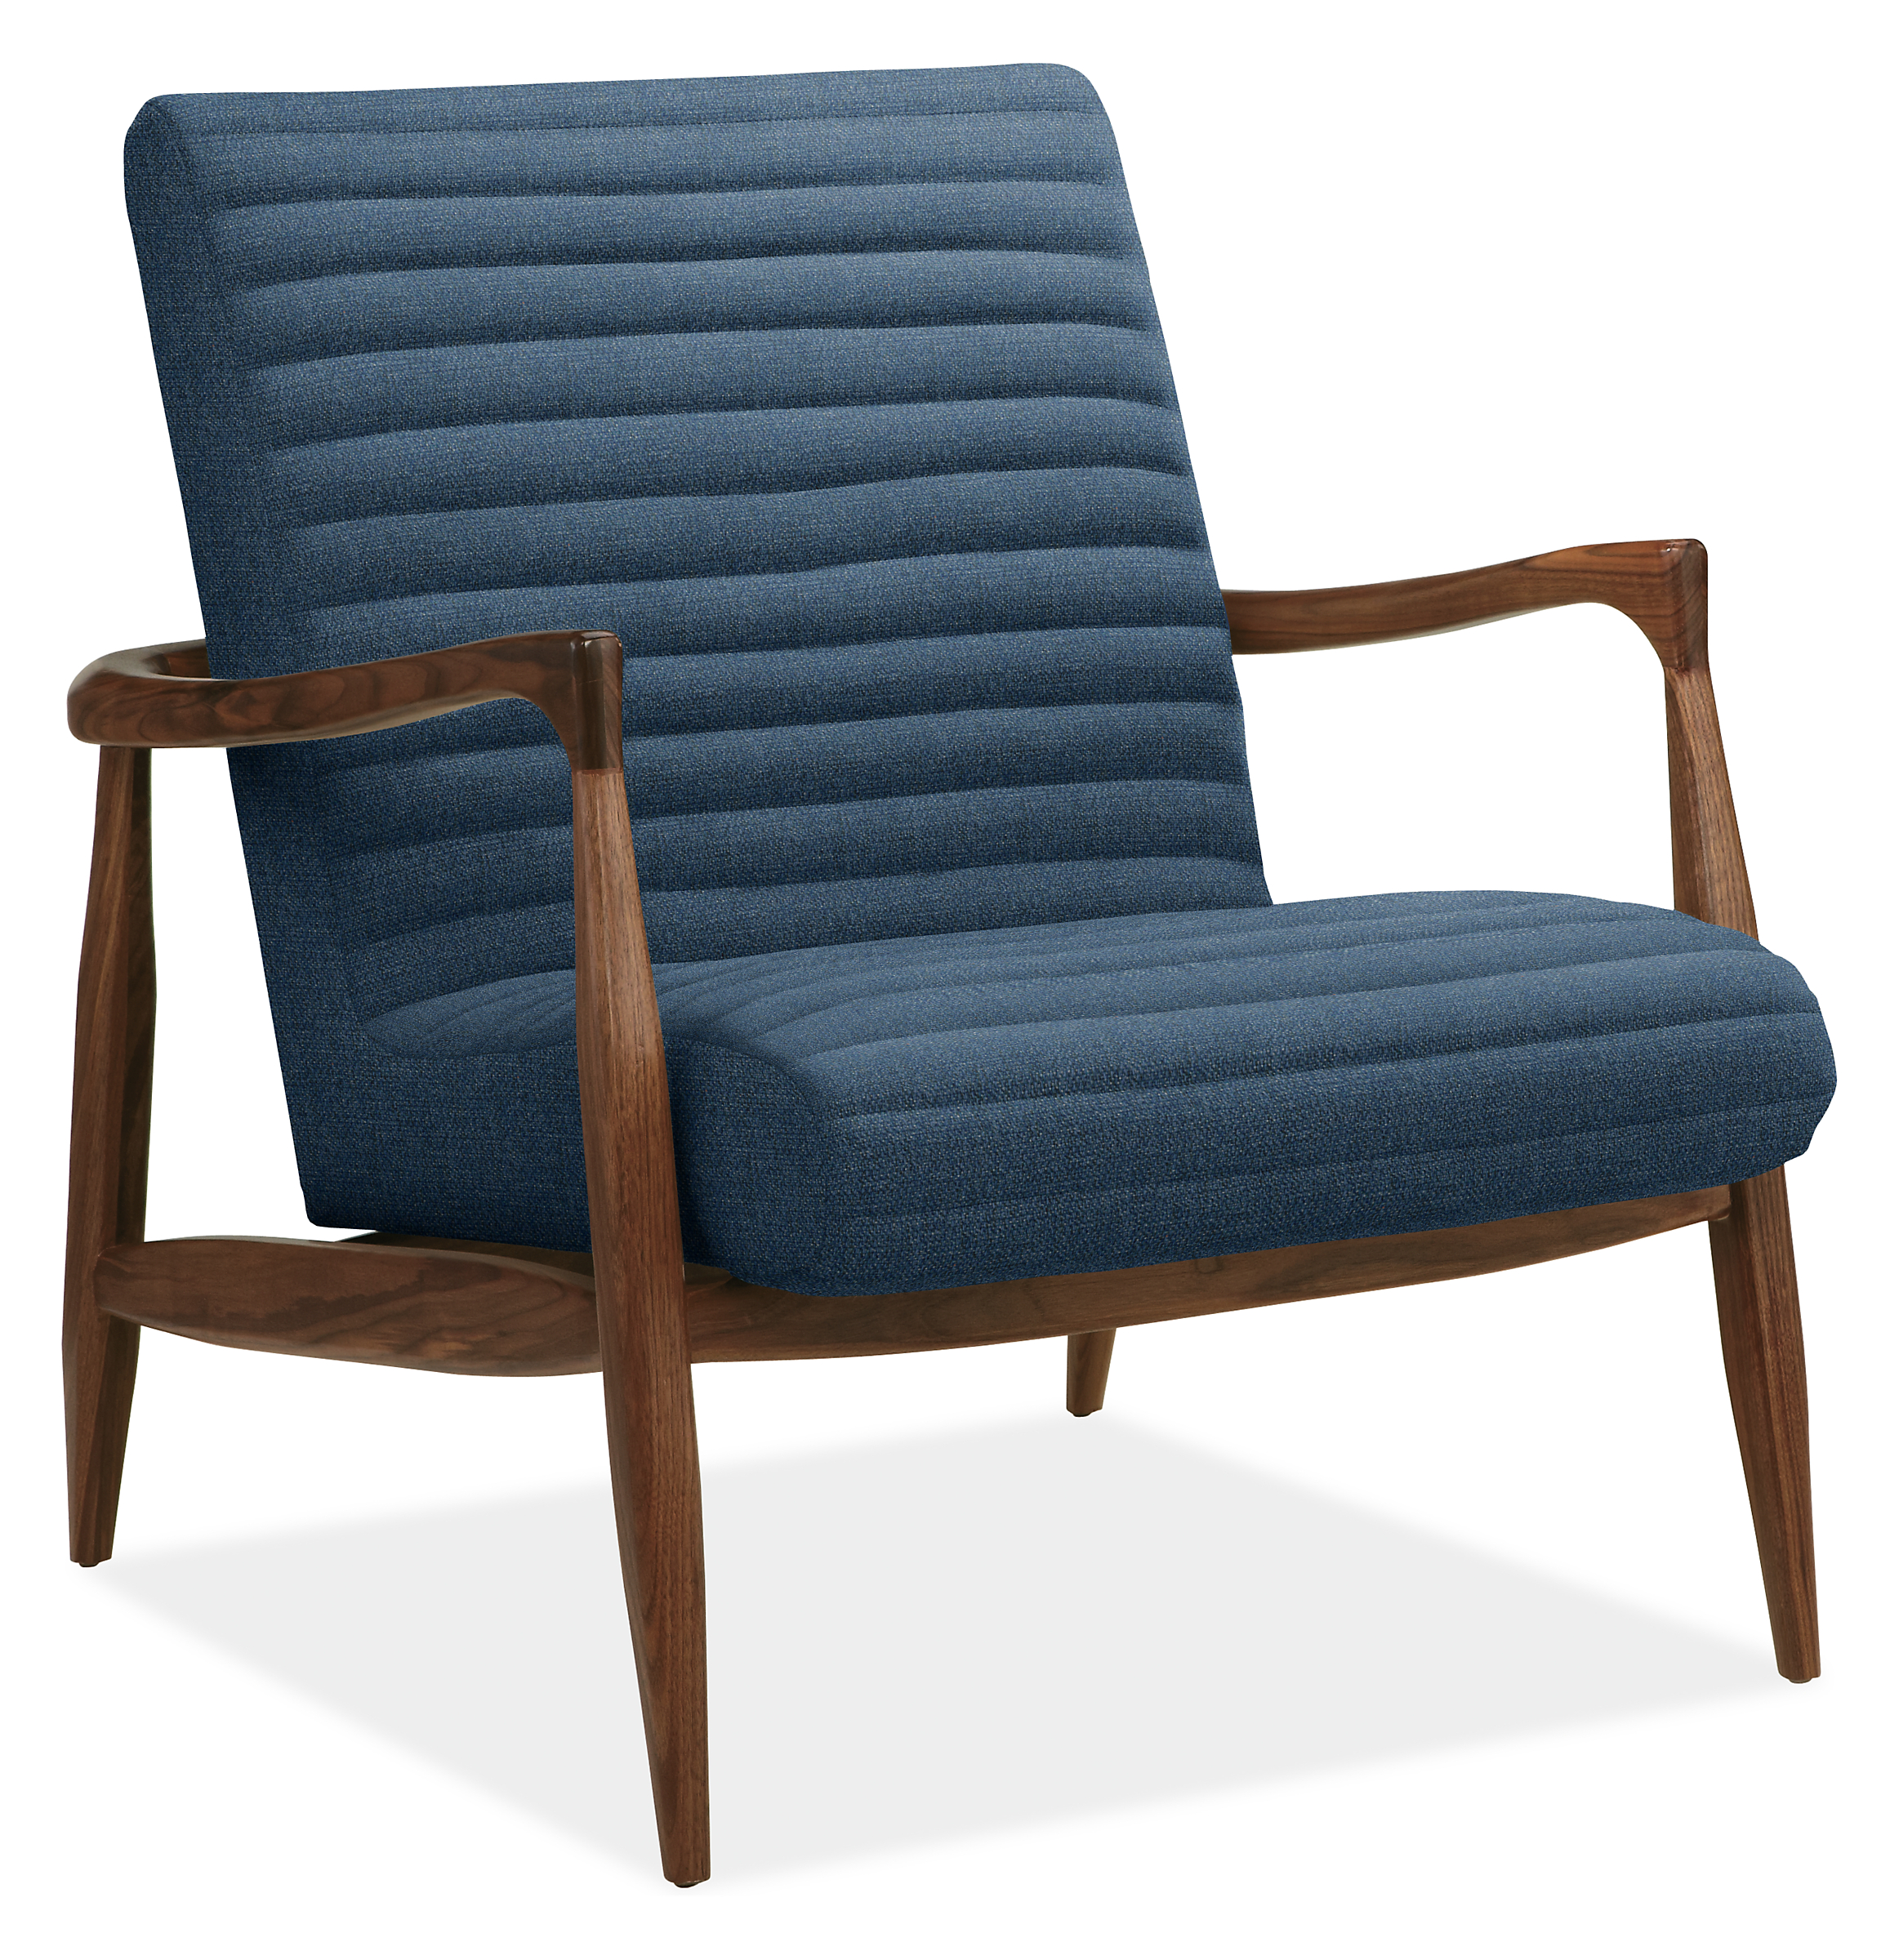 Callan Chair in Tepic Navy with Walnut Frame